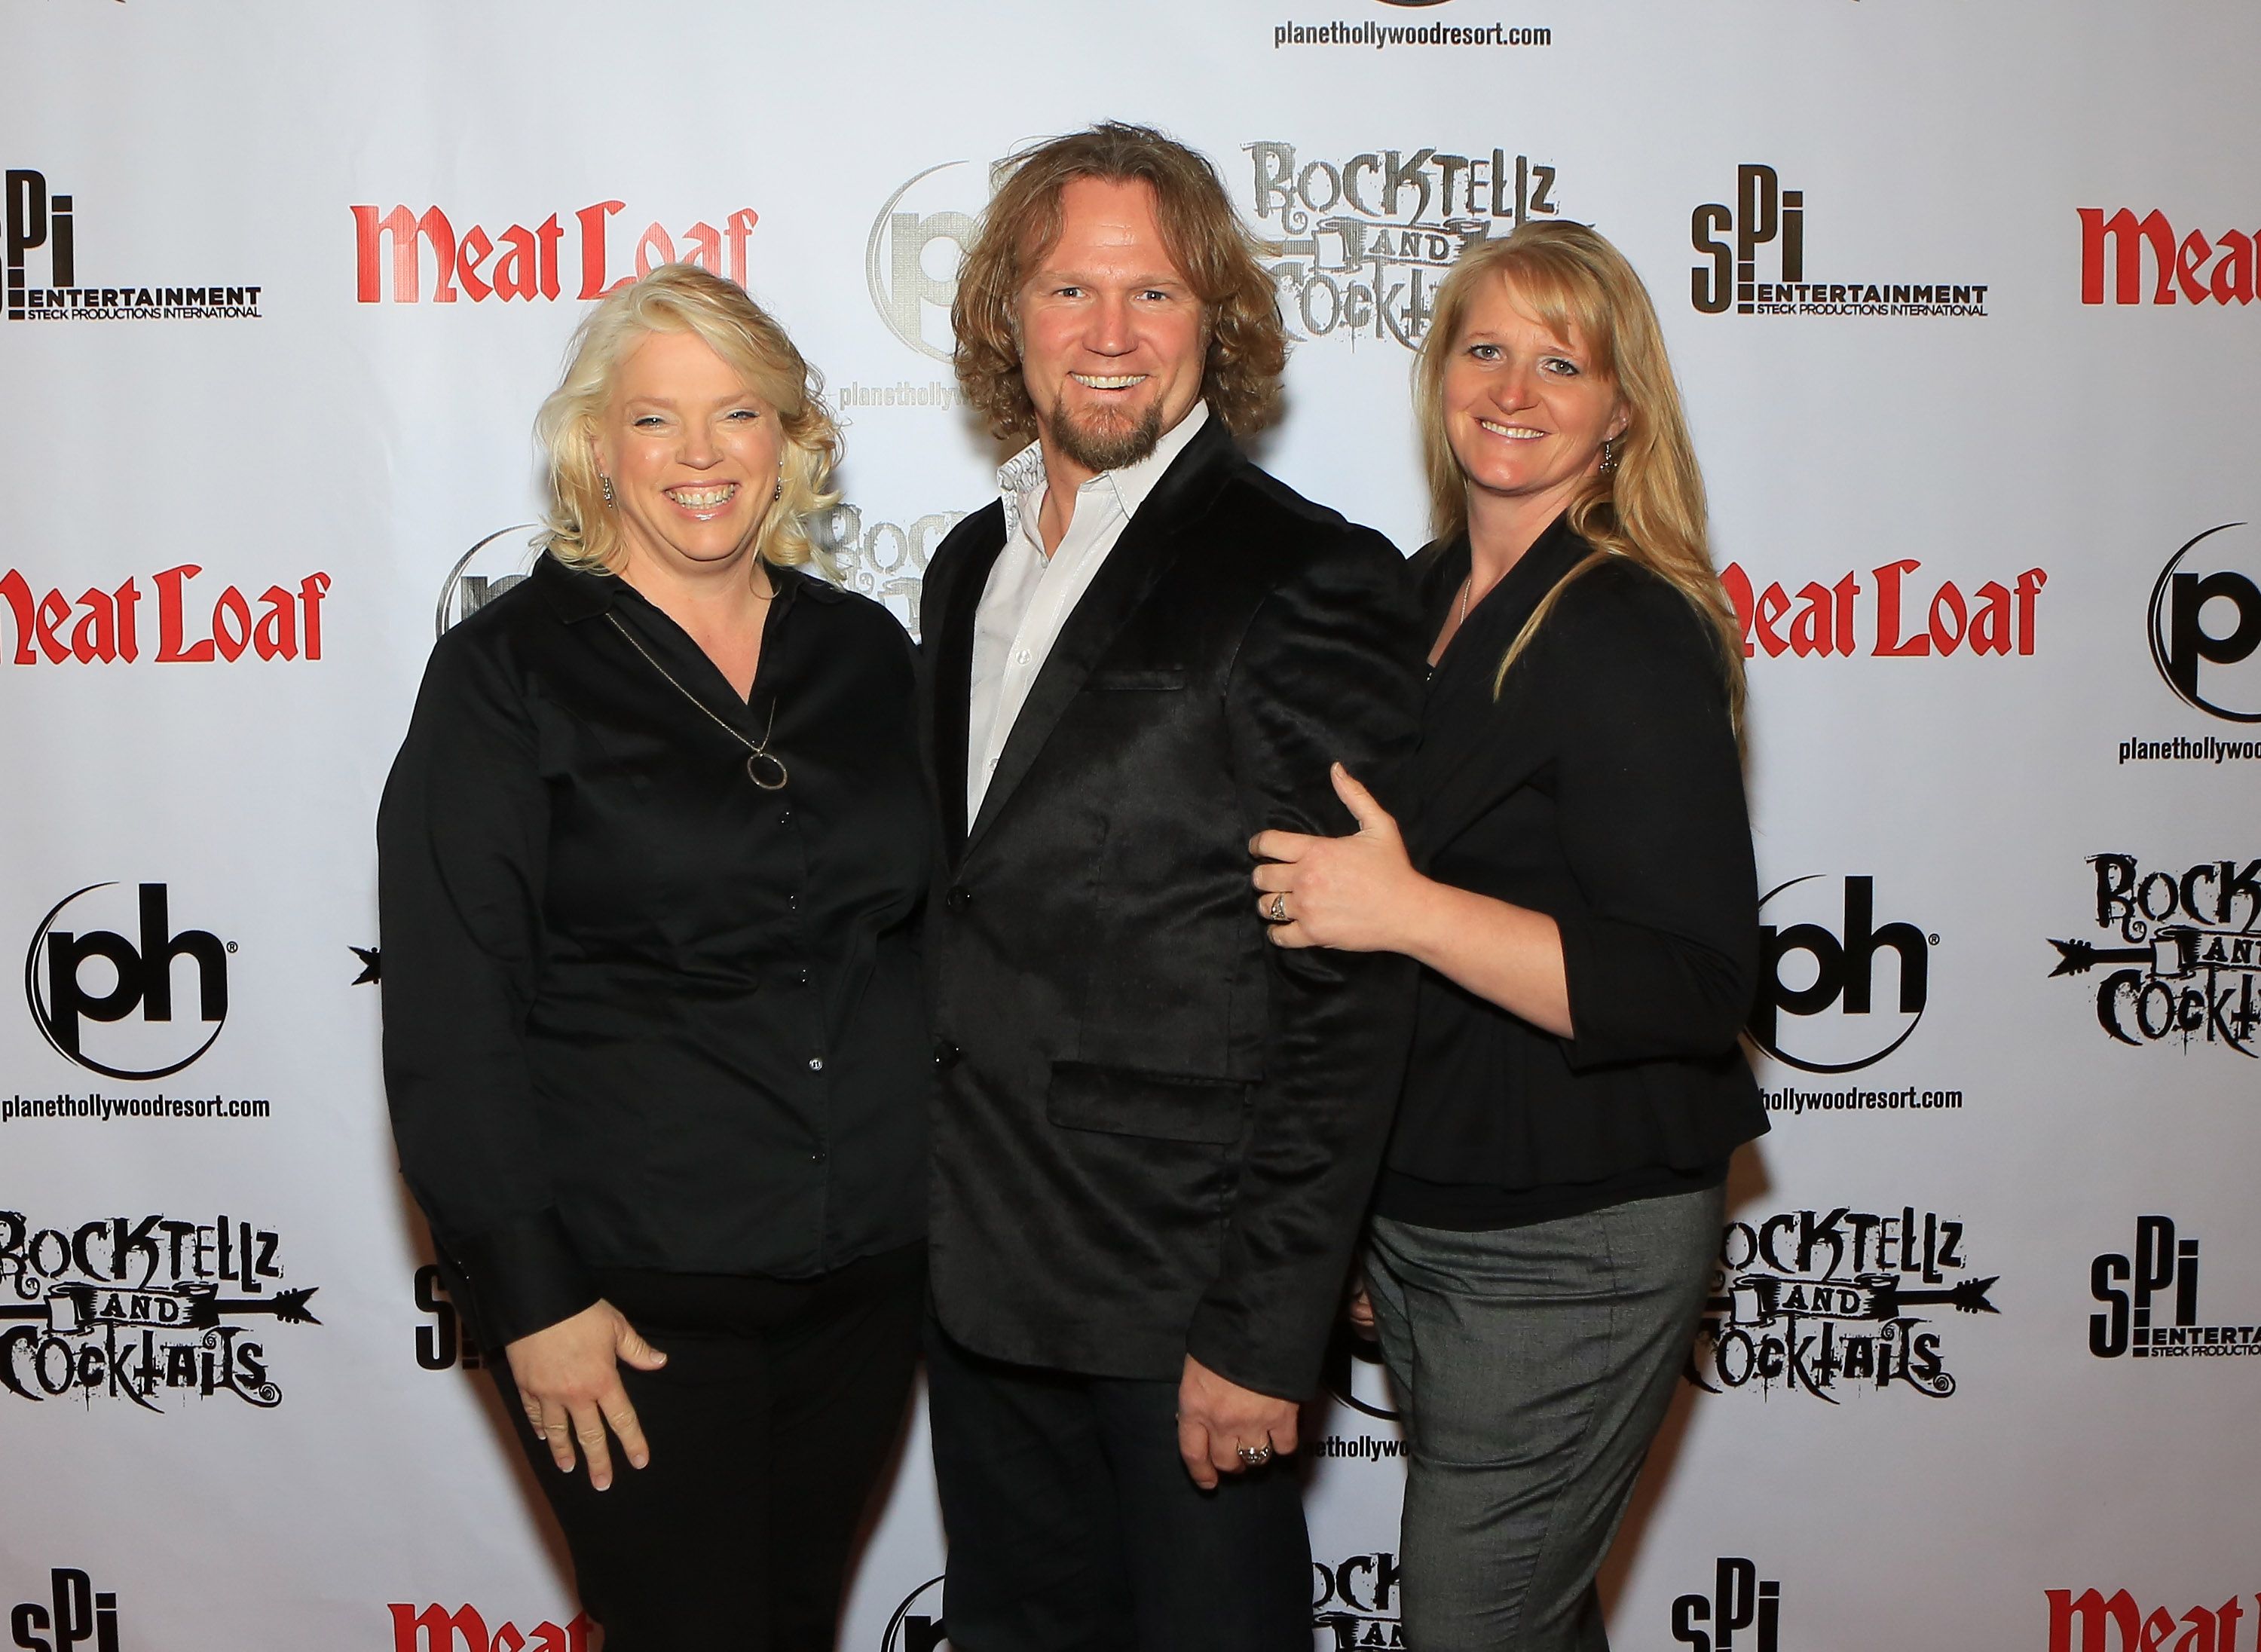 Janelle Brown, Kody Brown and Christine Brown during show "RockTellz & CockTails presents Meat Loaf" at Planet Hollywood Resort & Casino on October 3, 2013, in Las Vegas, Nevada. | Source: Getty Images